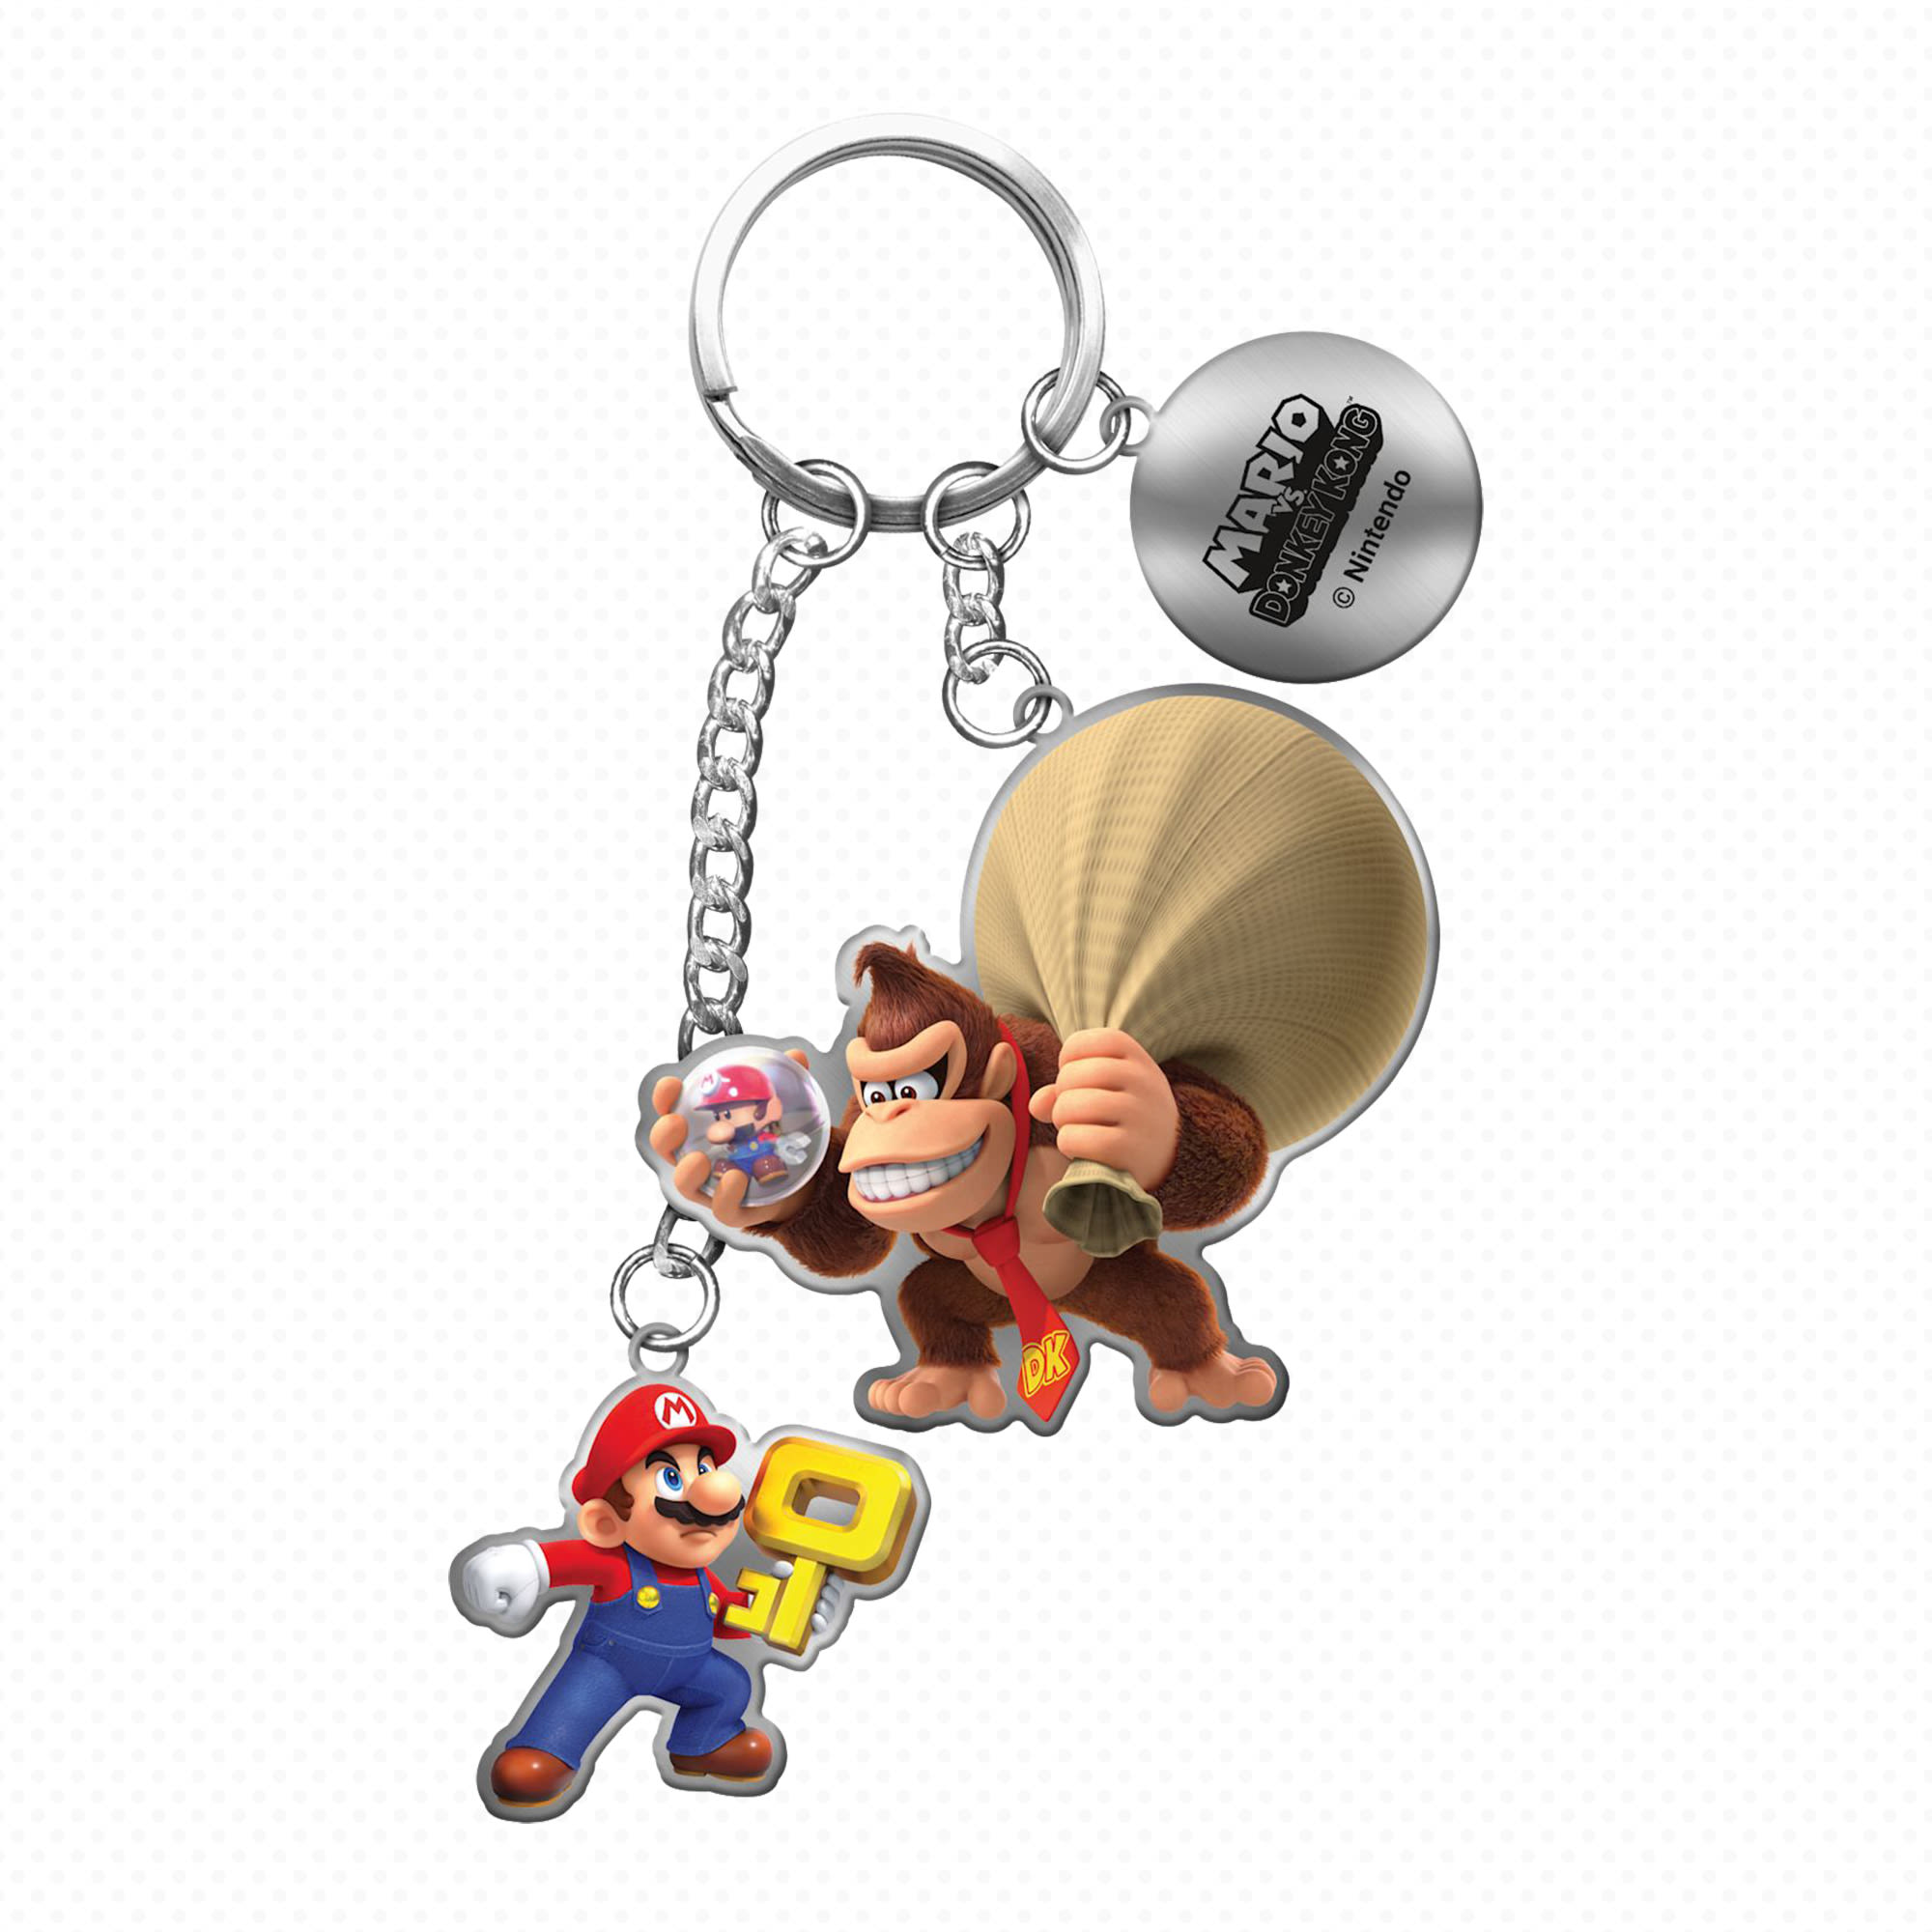 You can pre-order Mario vs. Donkey Kong on My Nintendo Store to receive a  keyring as a bonus item with purchase!, News